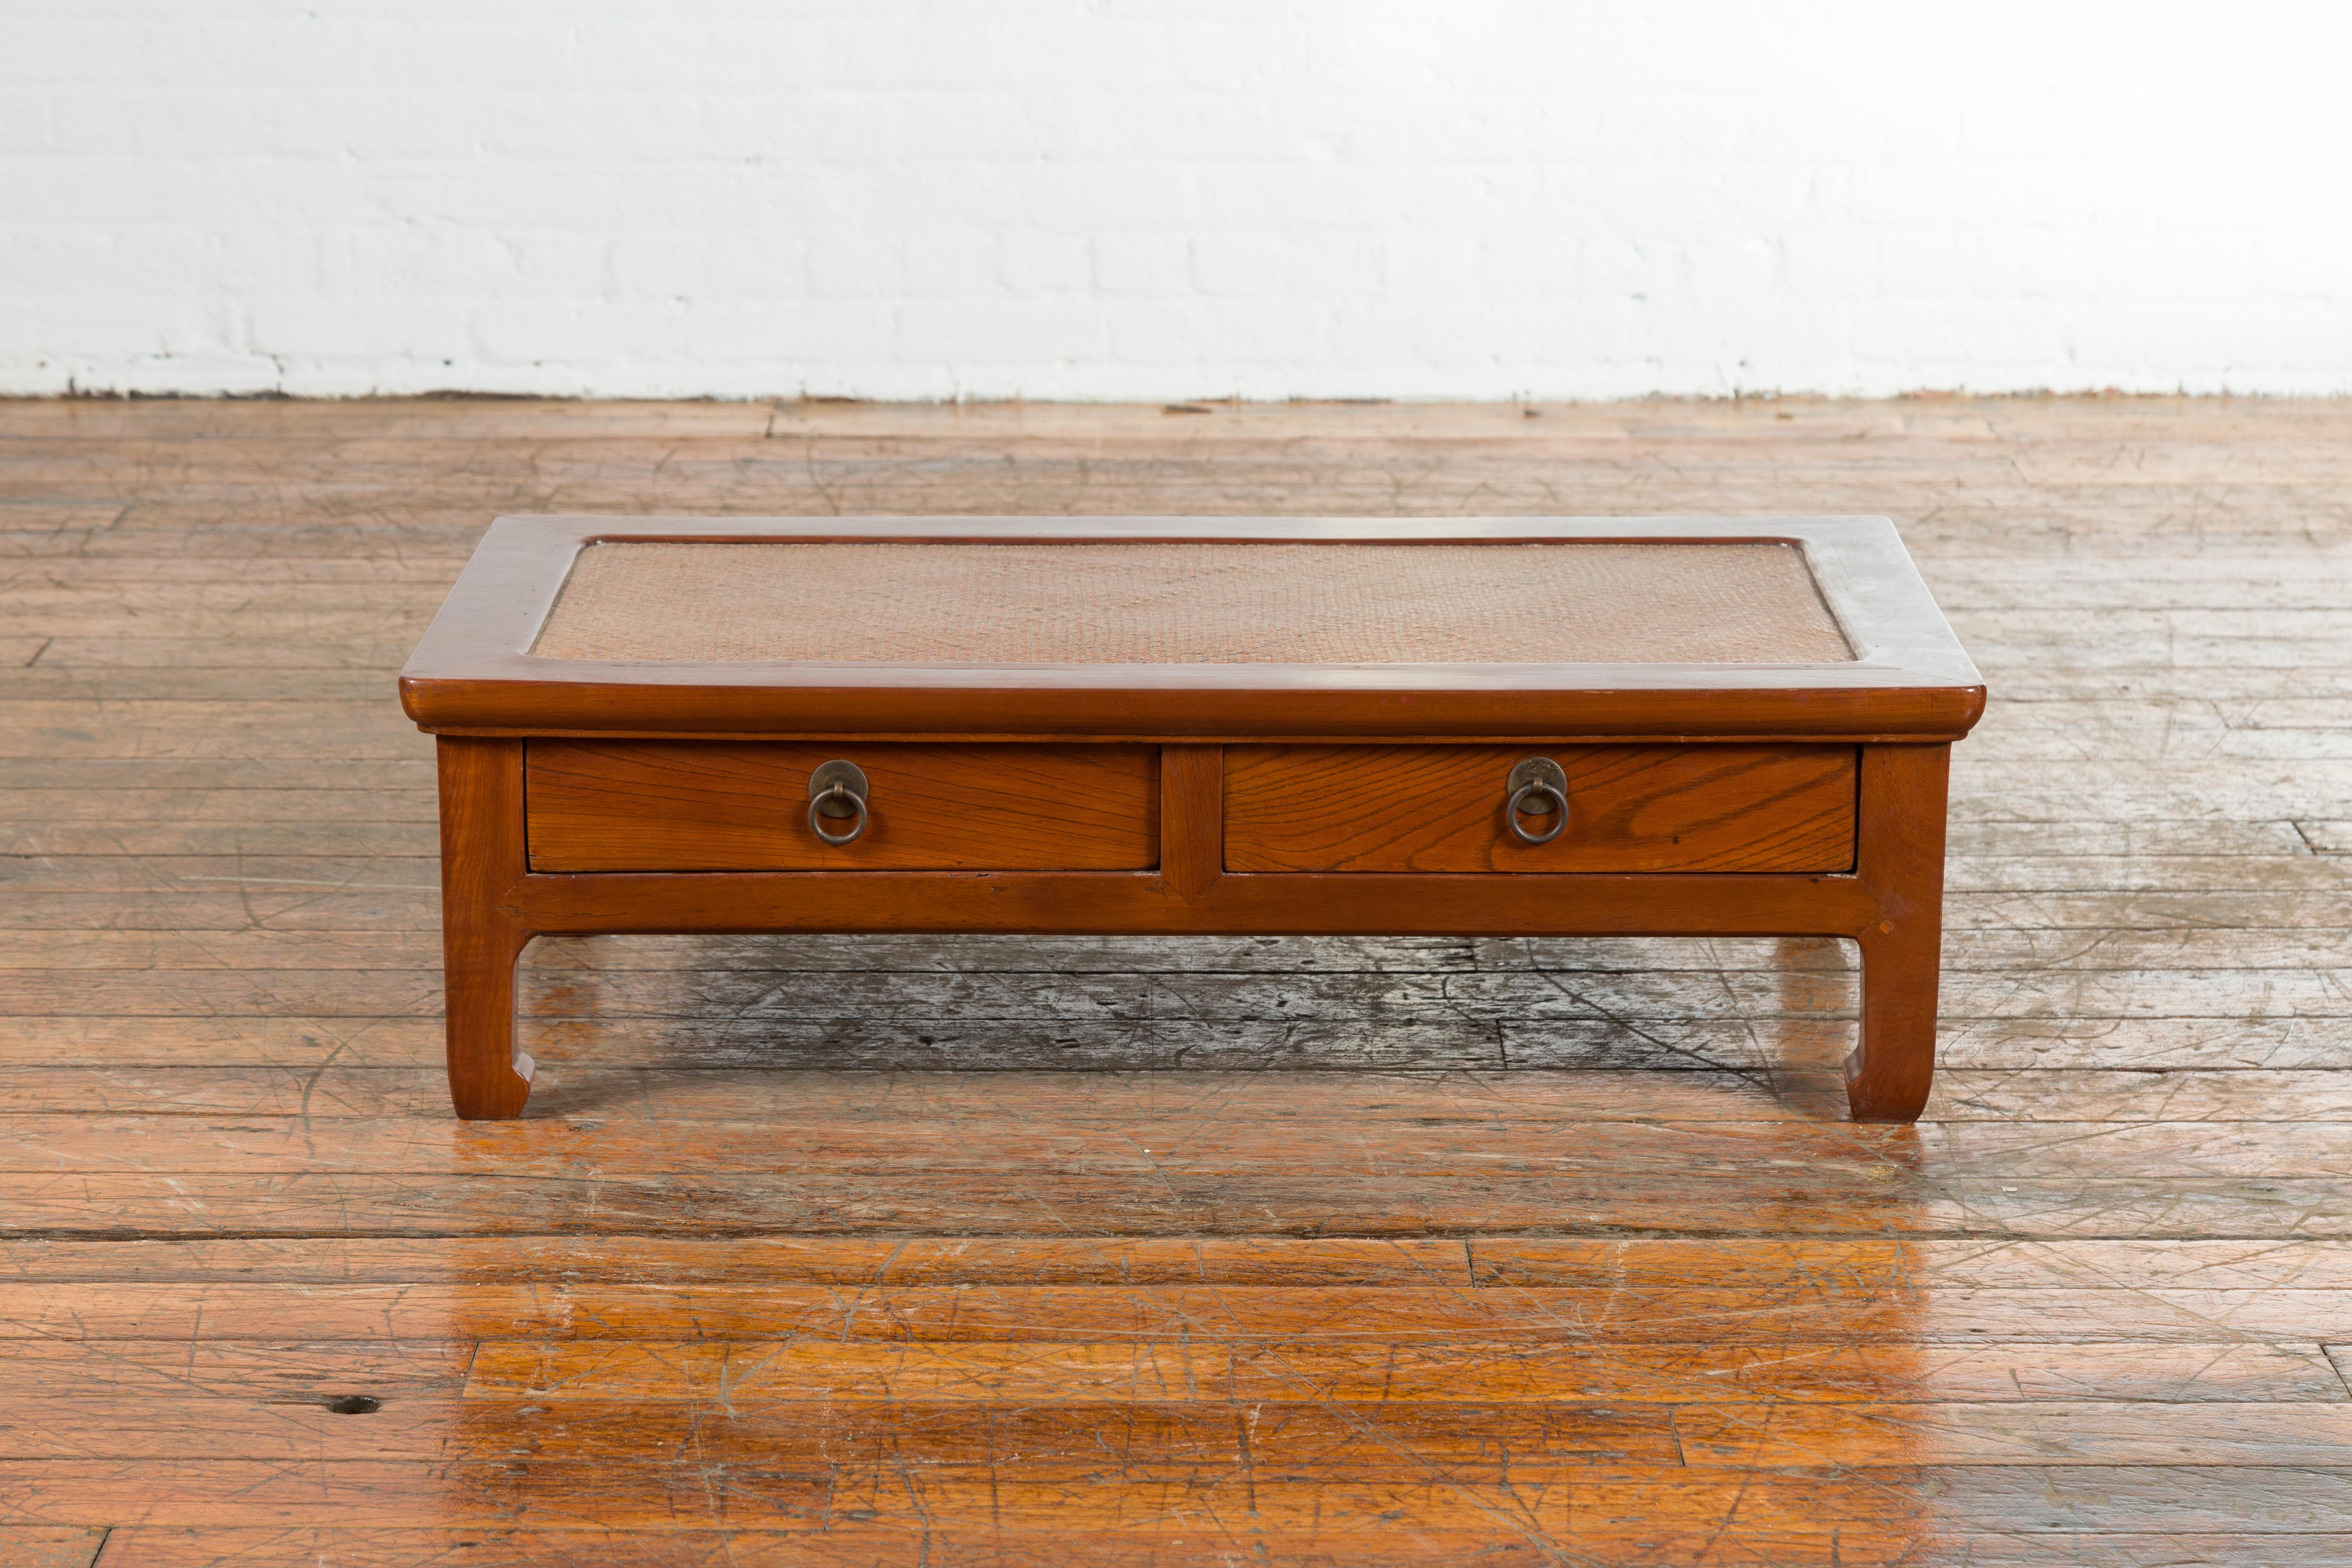 A Chinese vintage low elmwood table from the mid 20th century, with rattan inset top, two drawers and horsehoof feet. Created in China during the midcentury period, this low elm table features a rectangular top with rattan insert, sitting above two